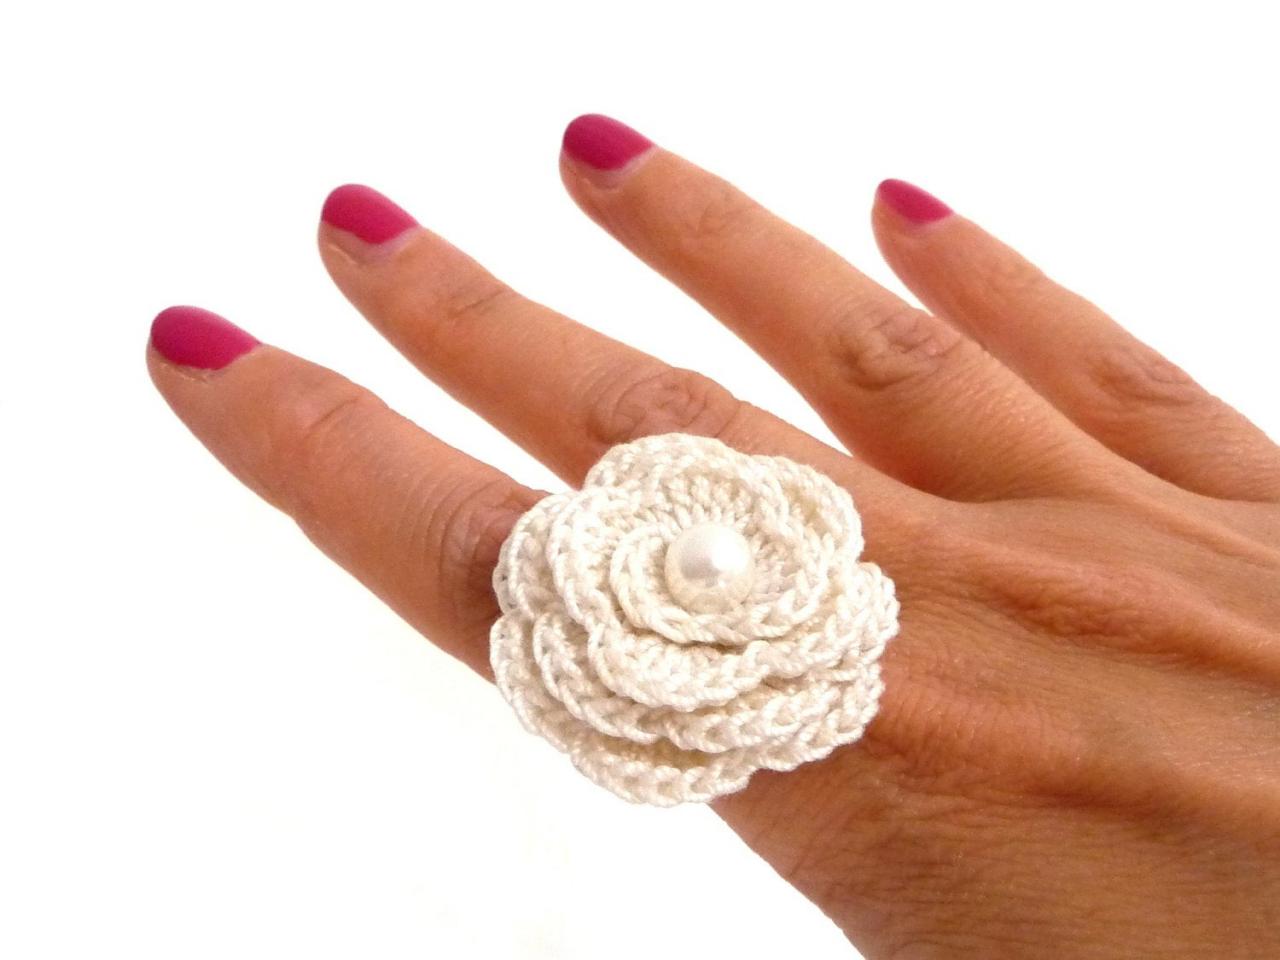 White Crochet Flower Ring - Cotton Rose, Adjustable, Statement, Boho, Romantic Ring - Bridesmaid, Mothers Day, Anniversary, Valentines Gift